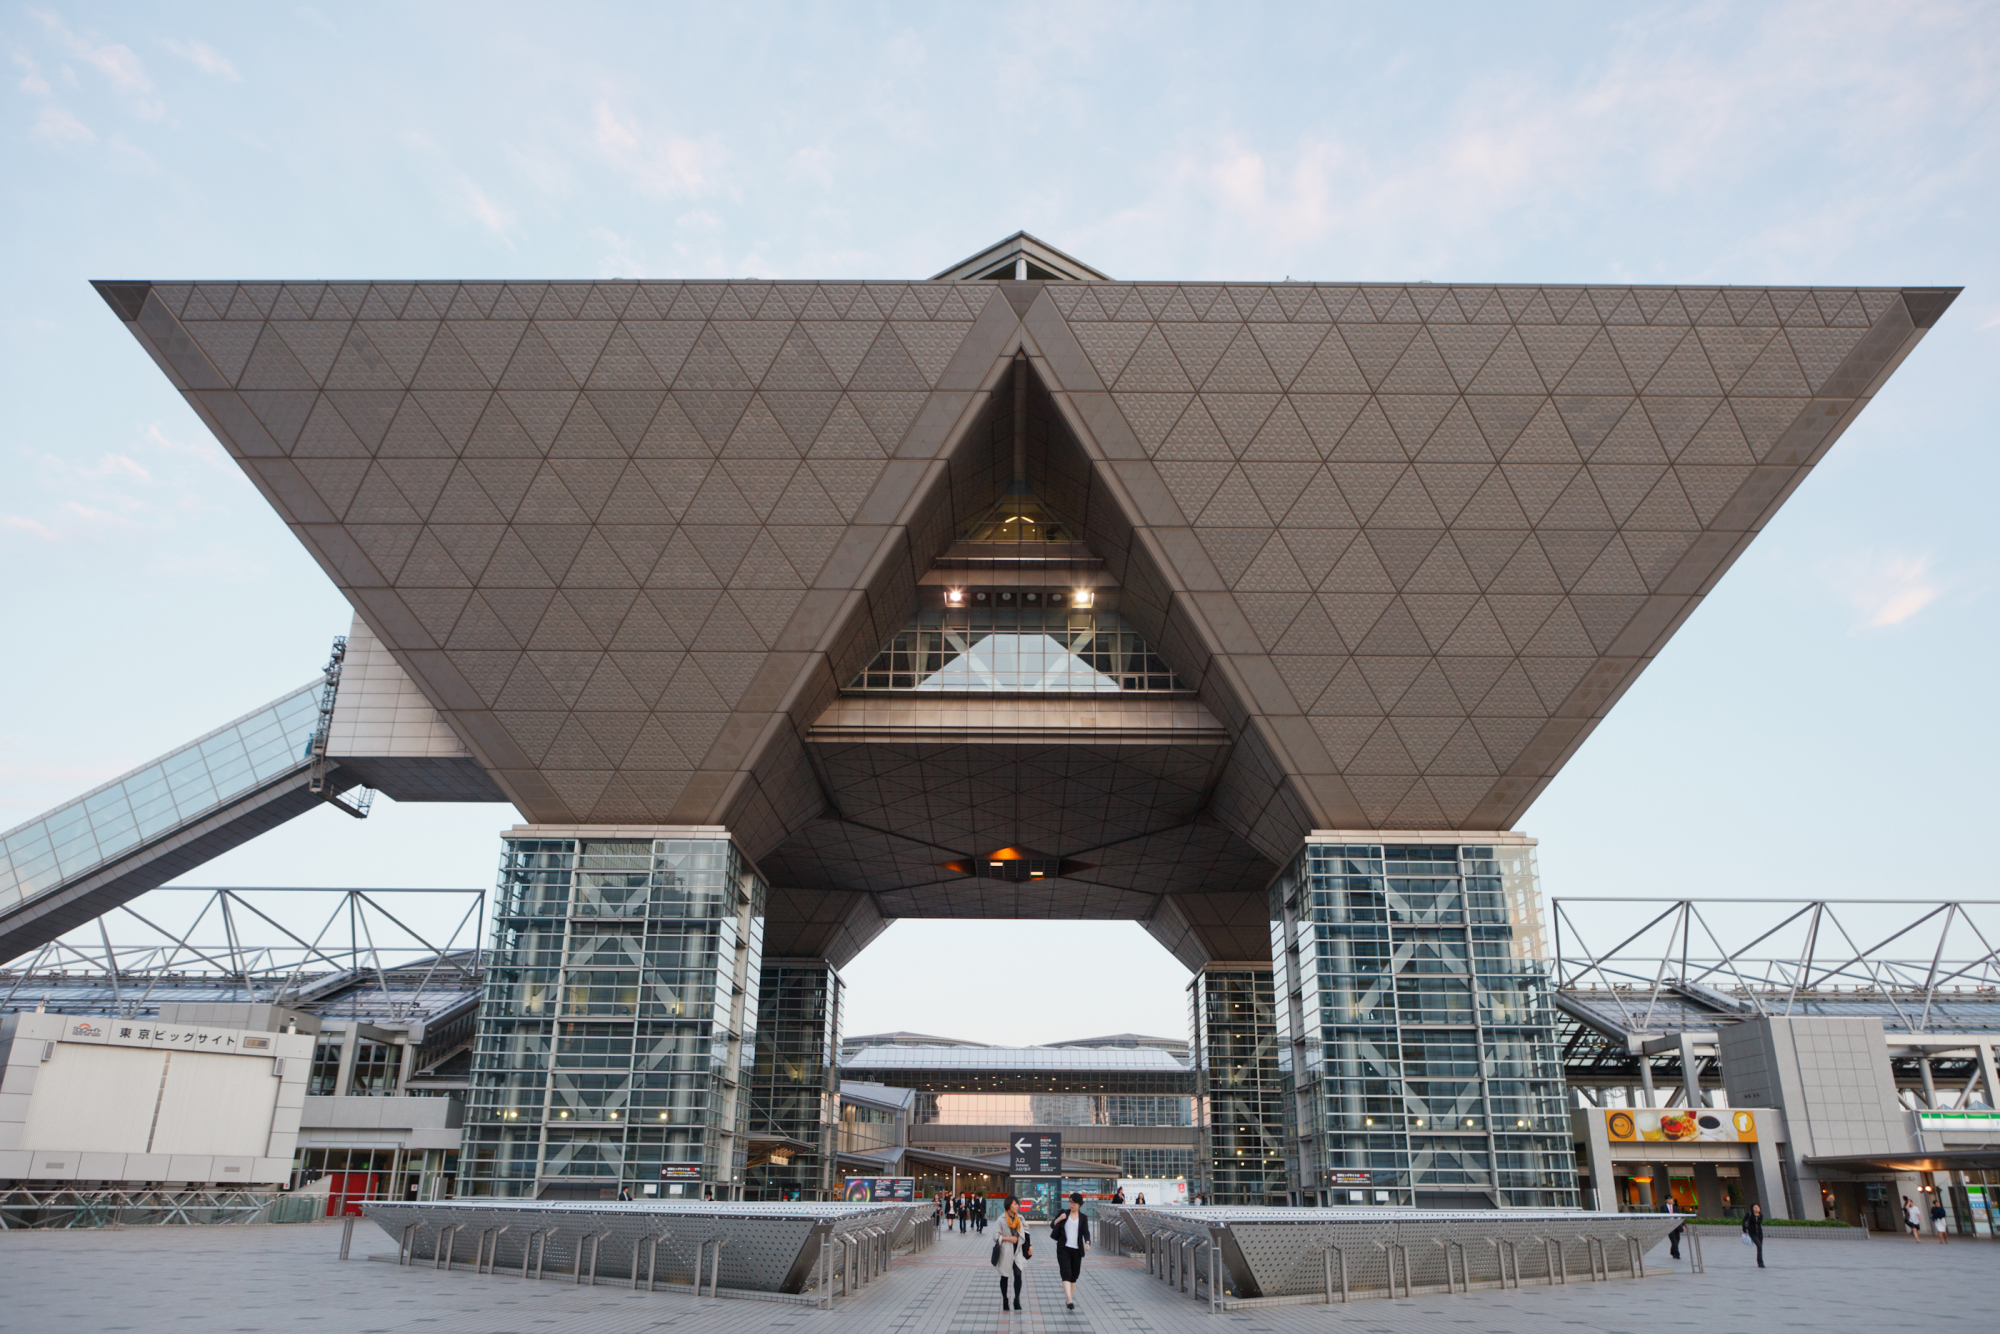 Small and midsize companies say the closure of Tokyo Big Sight, the nation's biggest convention center, before and after the Tokyo Olympic Games in 2020 will damage their business. | ISTOCK